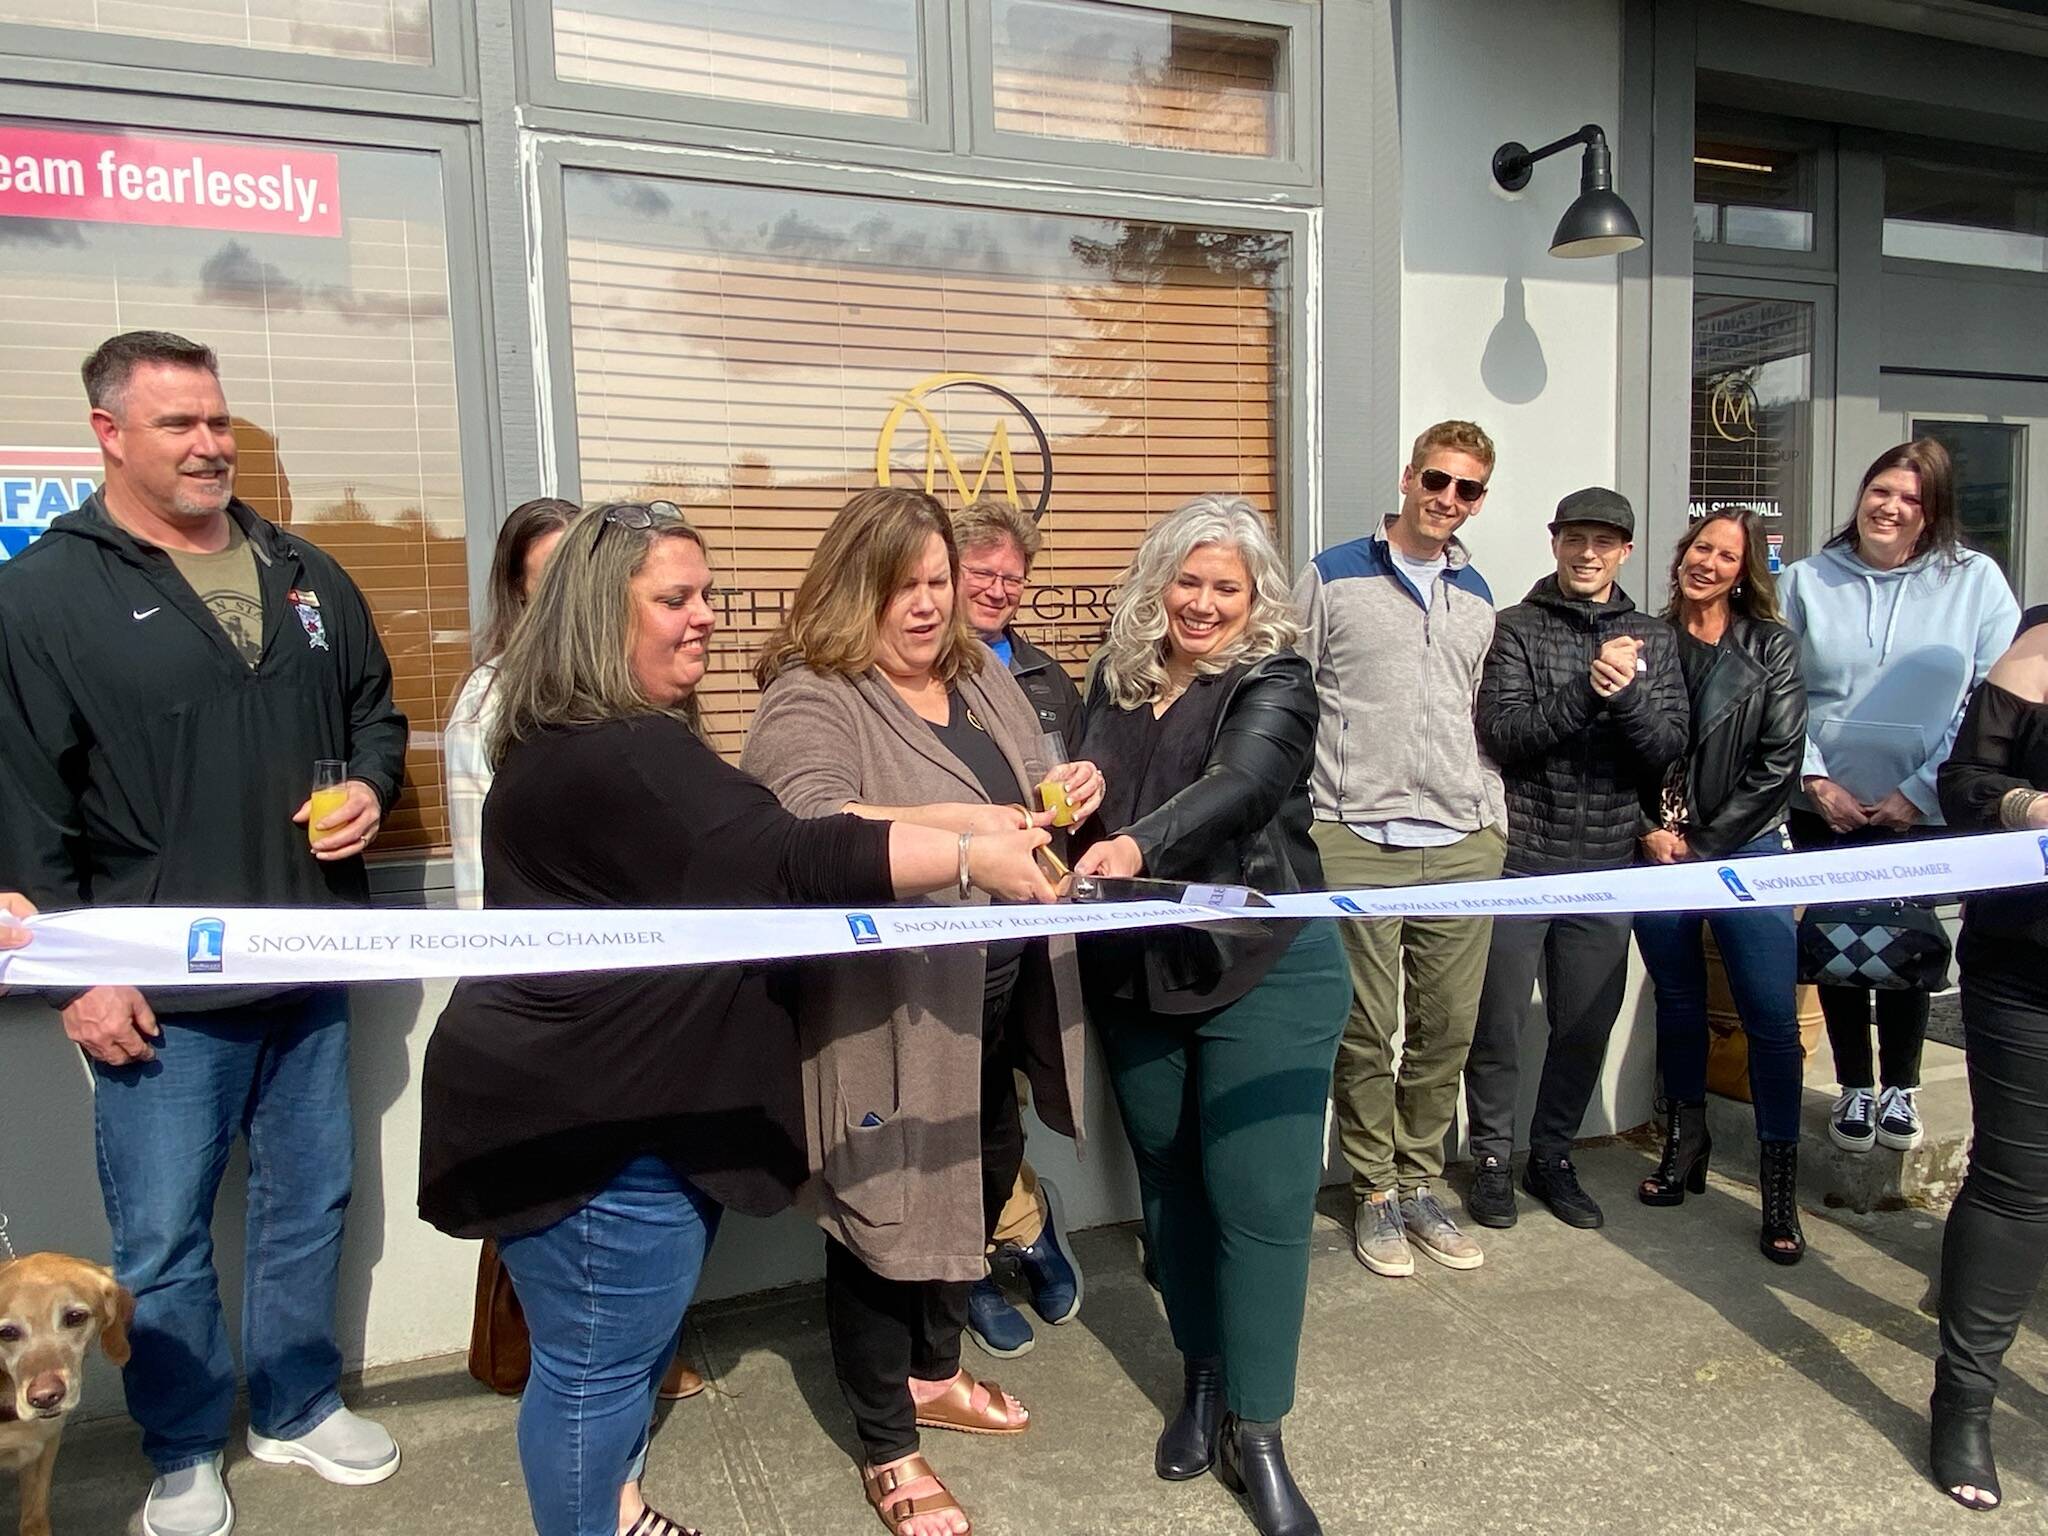 Messa Group Real Estate hosts a ribbon cutting with the SnoValley Chamber on April 28 to celebrate their new office located at 8224 Railroad Avenue in Snoqualmie. Photo William Shaw/Valley Record.